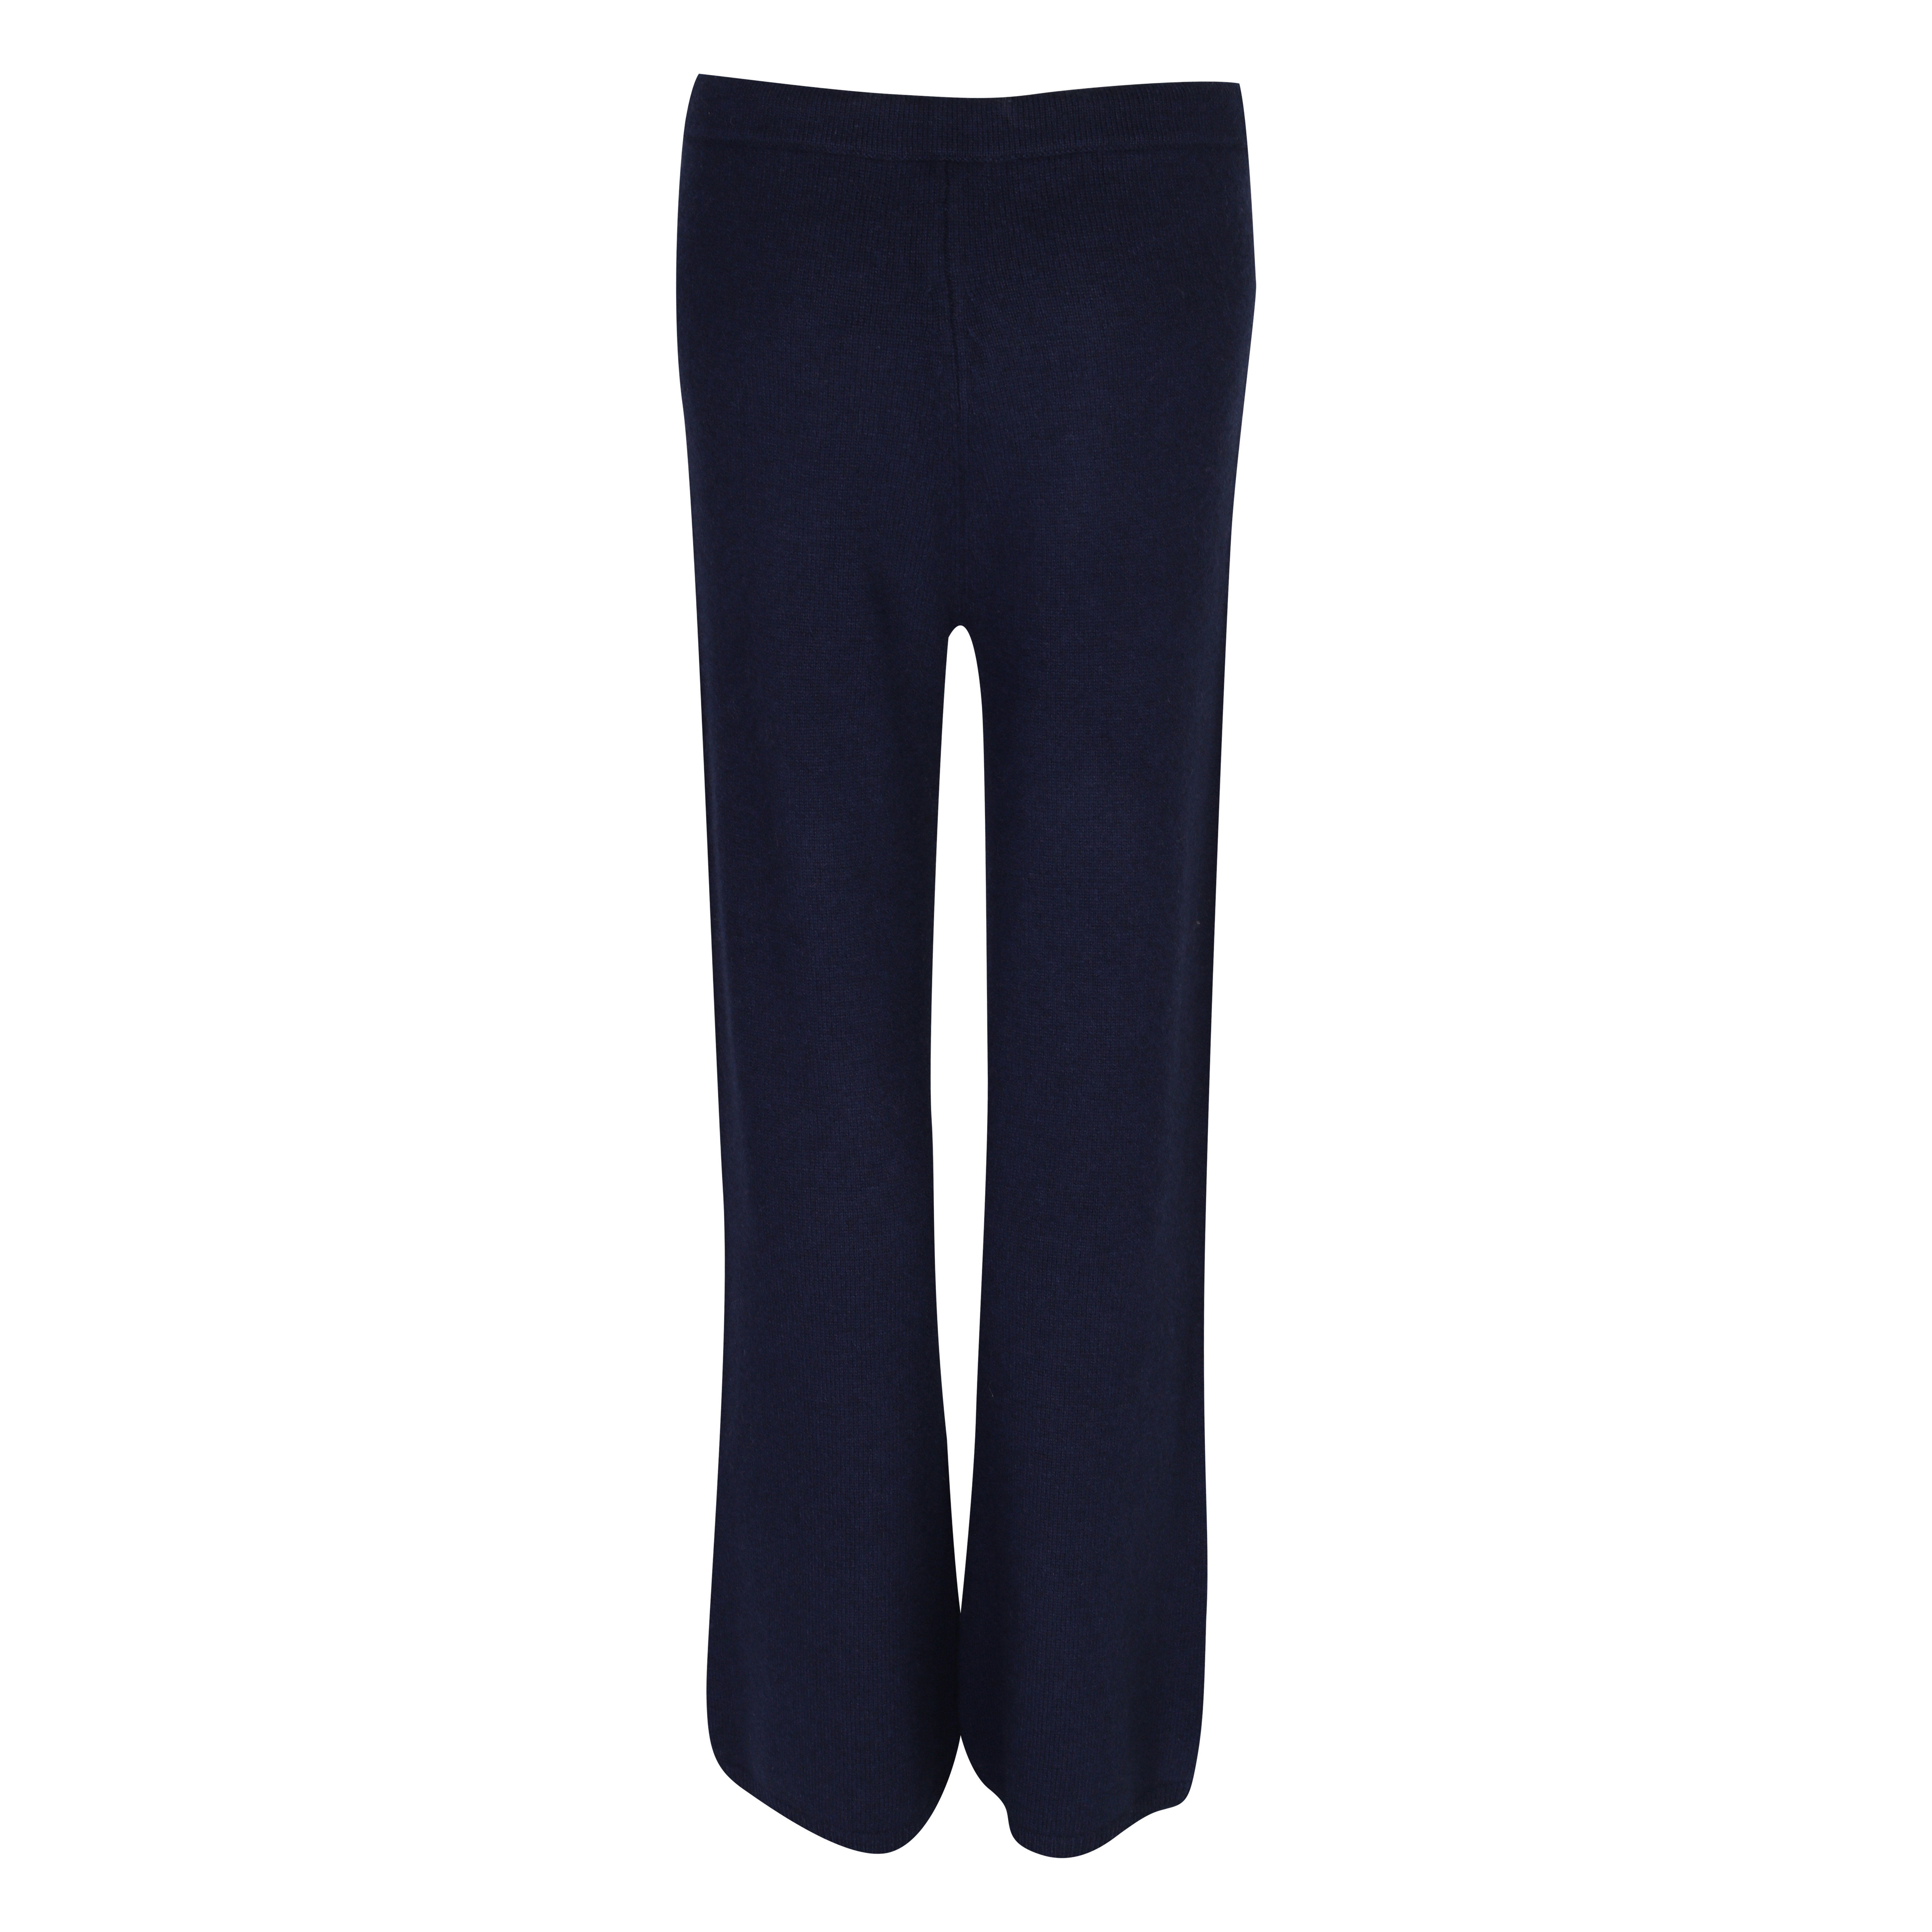 Flona Cashmere Pant in Navy XS